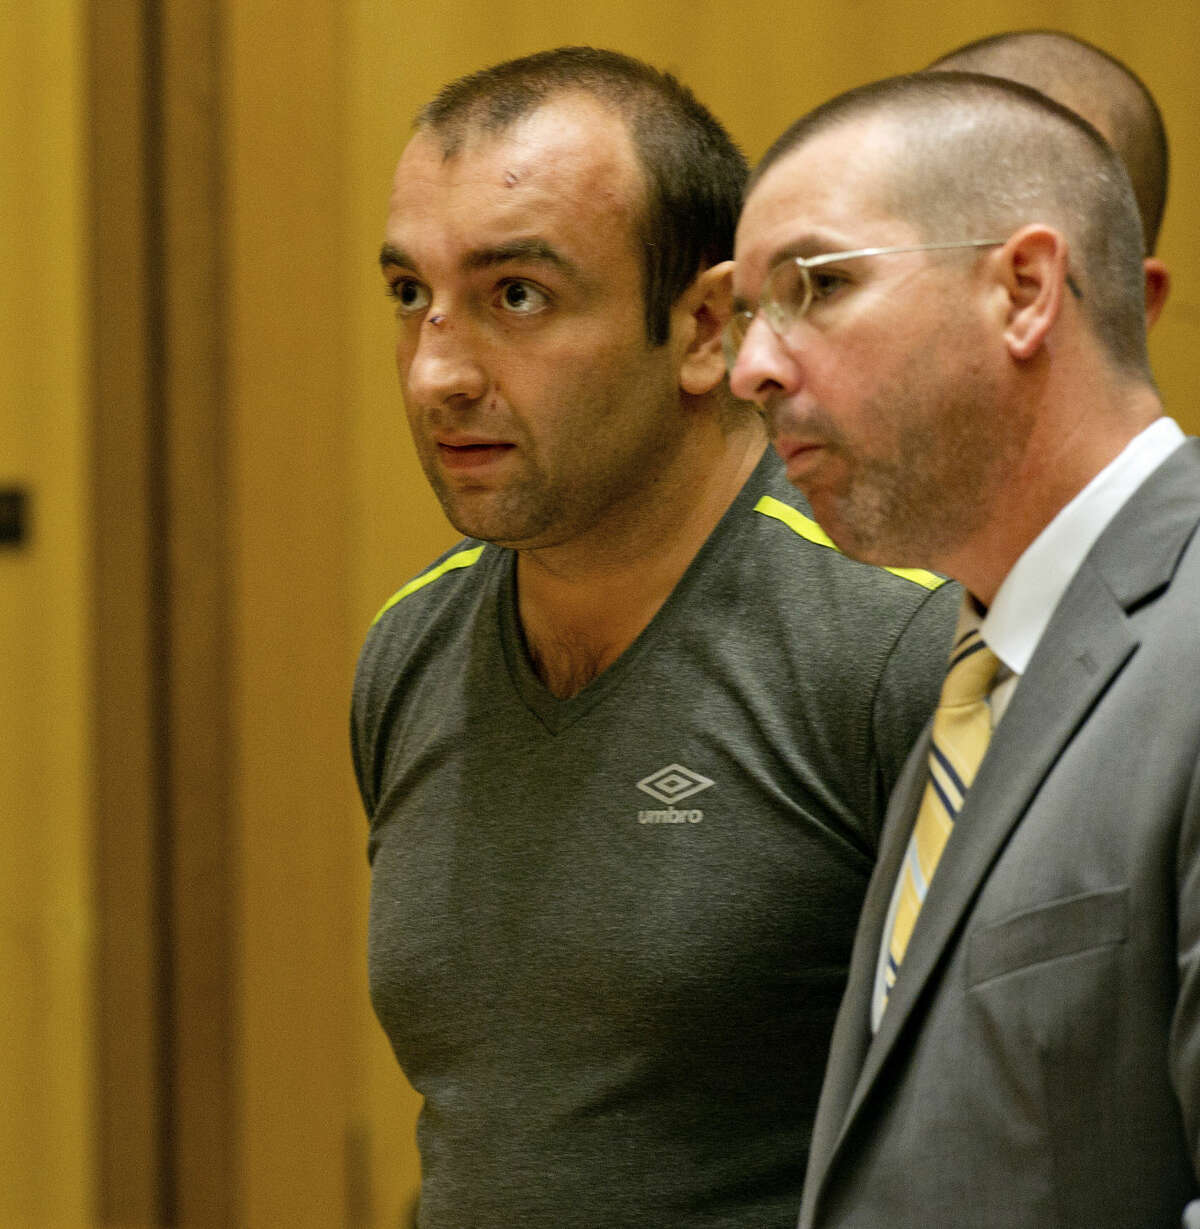 Shota Mekoshvili, with his attorney Lindy Urso in State Superior Court in Stamford, Conn., on Friday, August 29, 2014. Mekoshvili is accused of murdering Mohammed Kamal, the Stamford Taxi driver found near his cab on Doolittle Road earlier this week.(Mandatory Credit - Lindsay Perry/Stamford Advocate)